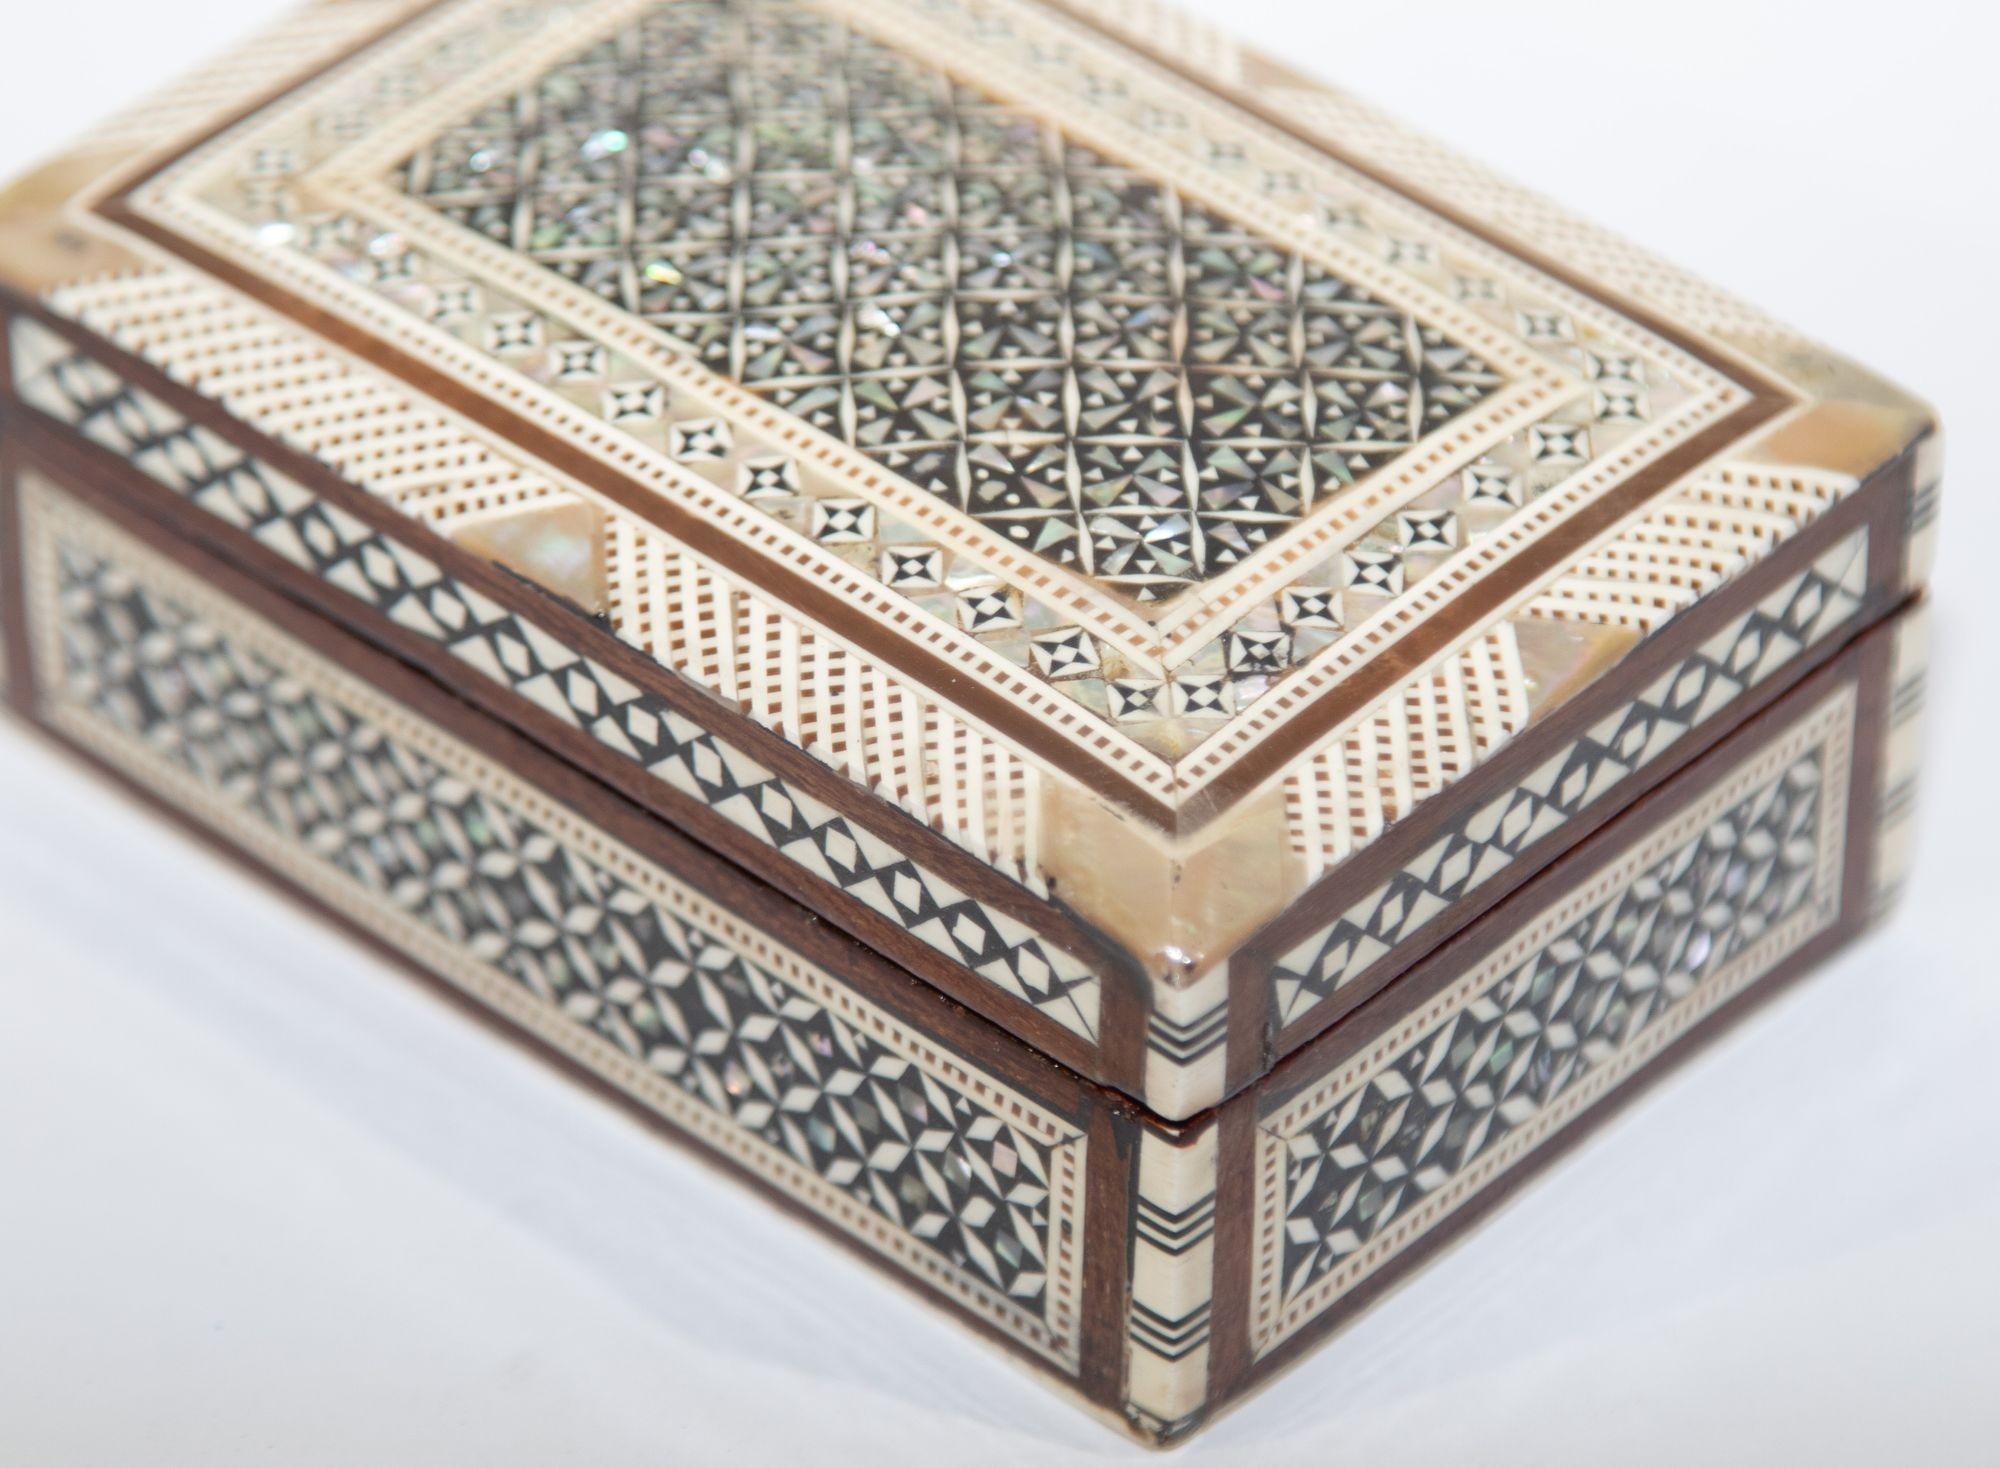 20th Century Middle Eastern Mosaic Wood Box with Inlays of Mother of Pearl, C. 1950s For Sale